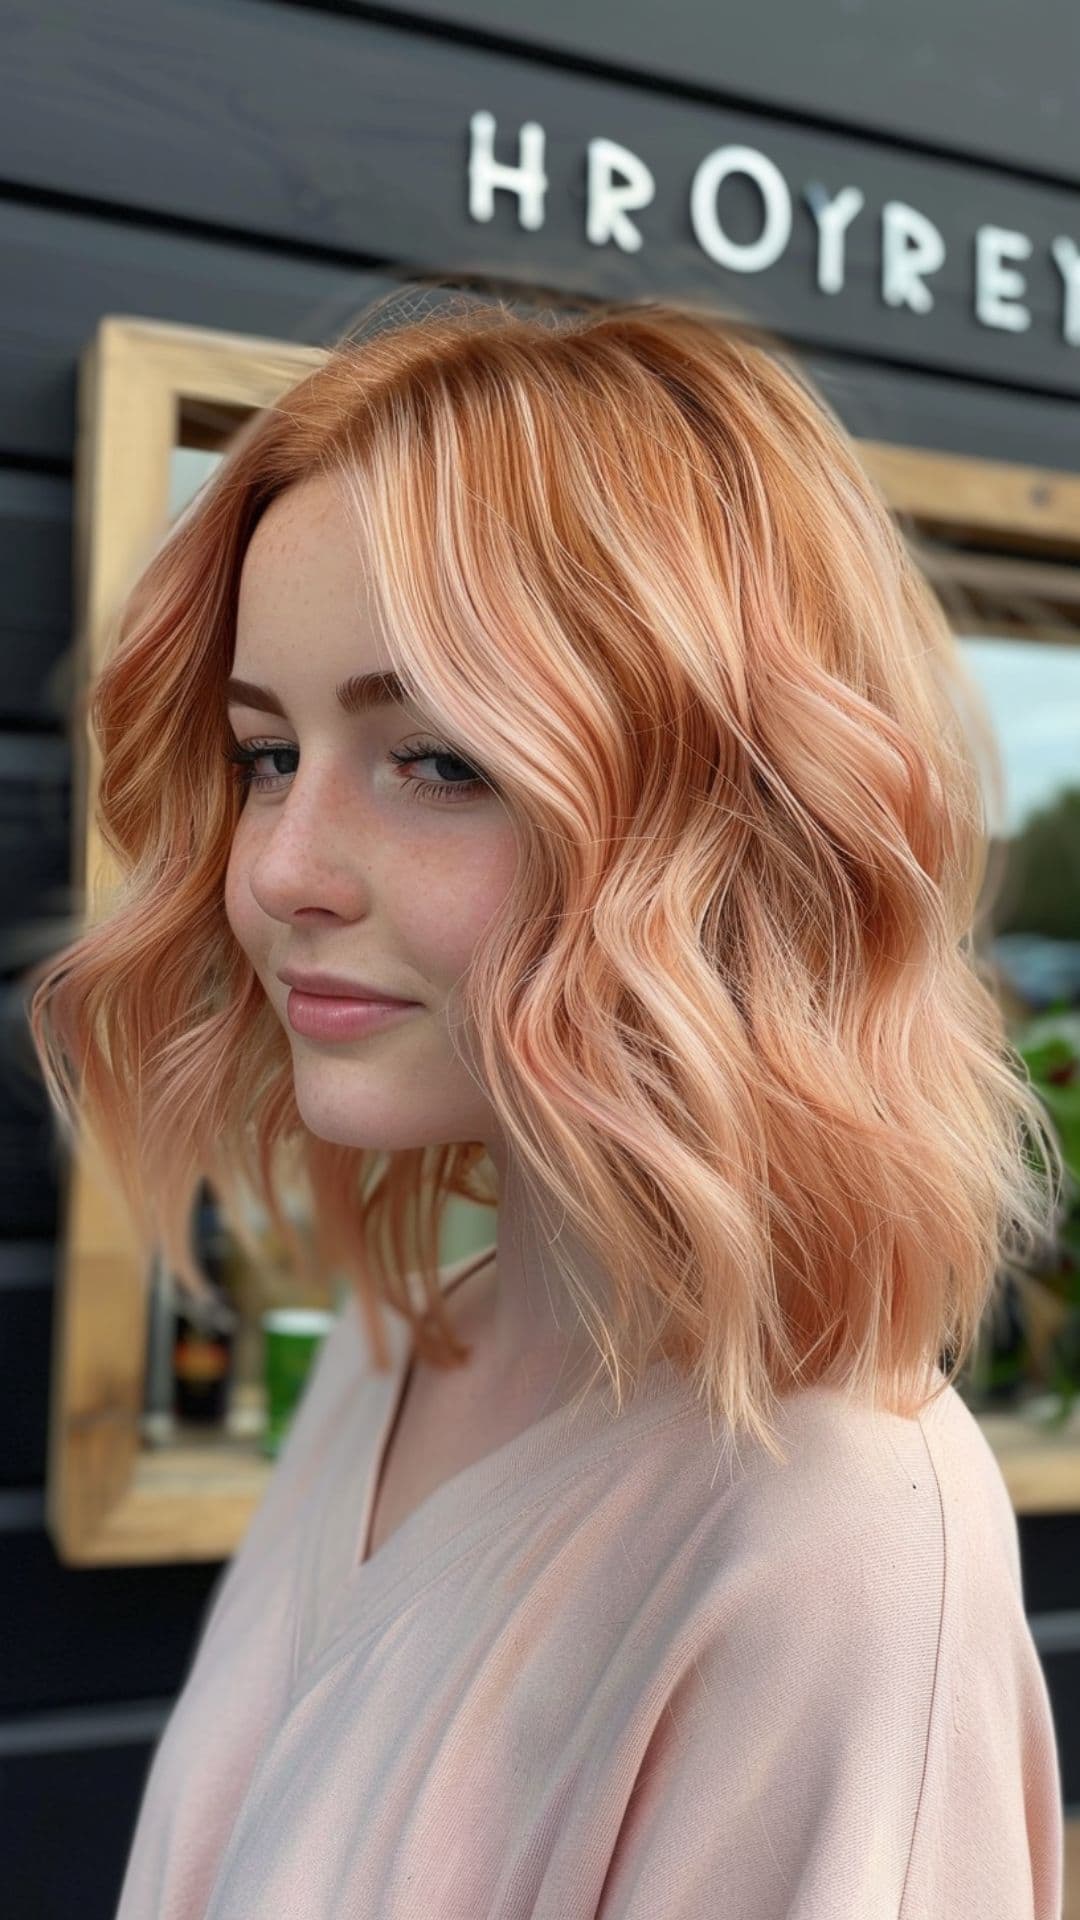 A young woman modelling a rose gold hair.